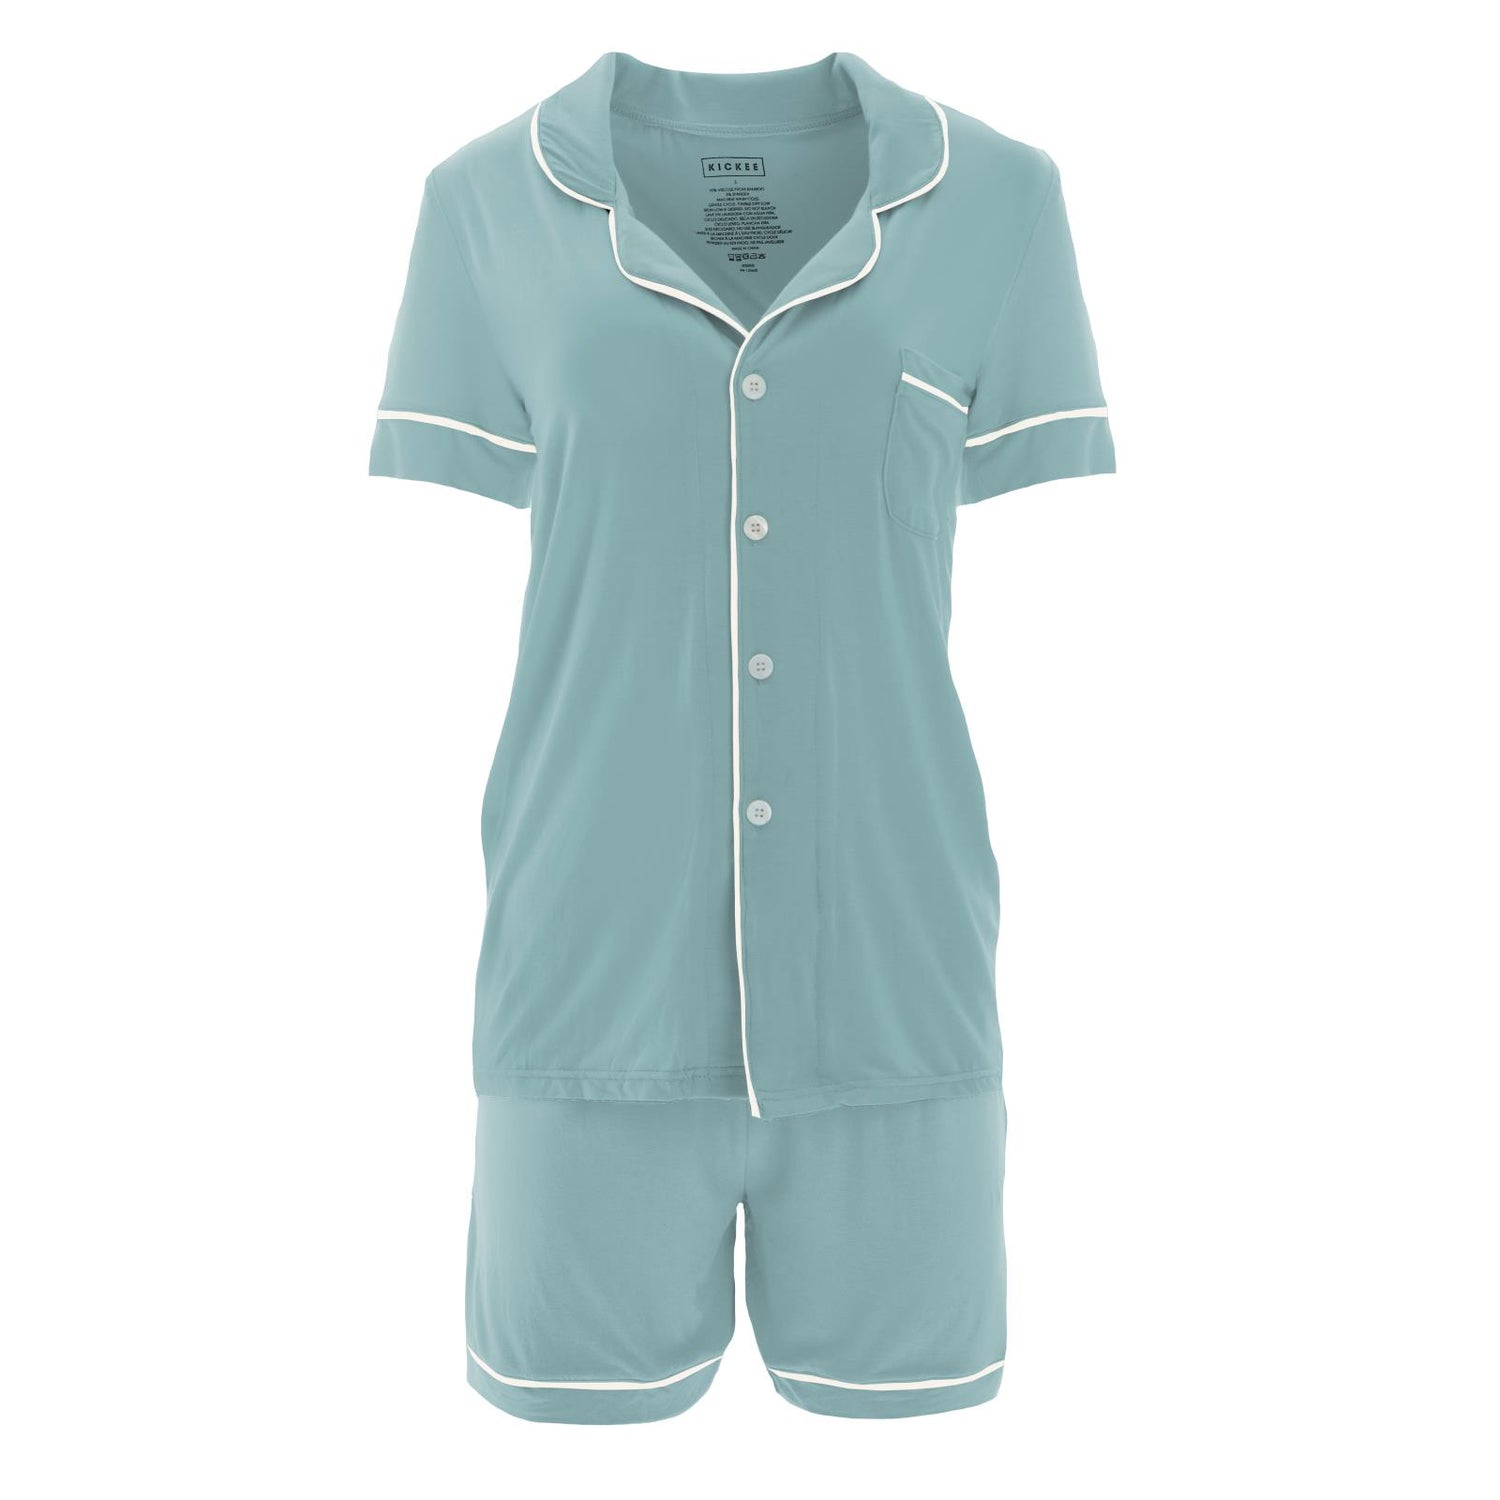 Women's Short Sleeve Collared Pajama Set with Shorts in Jade with Natural